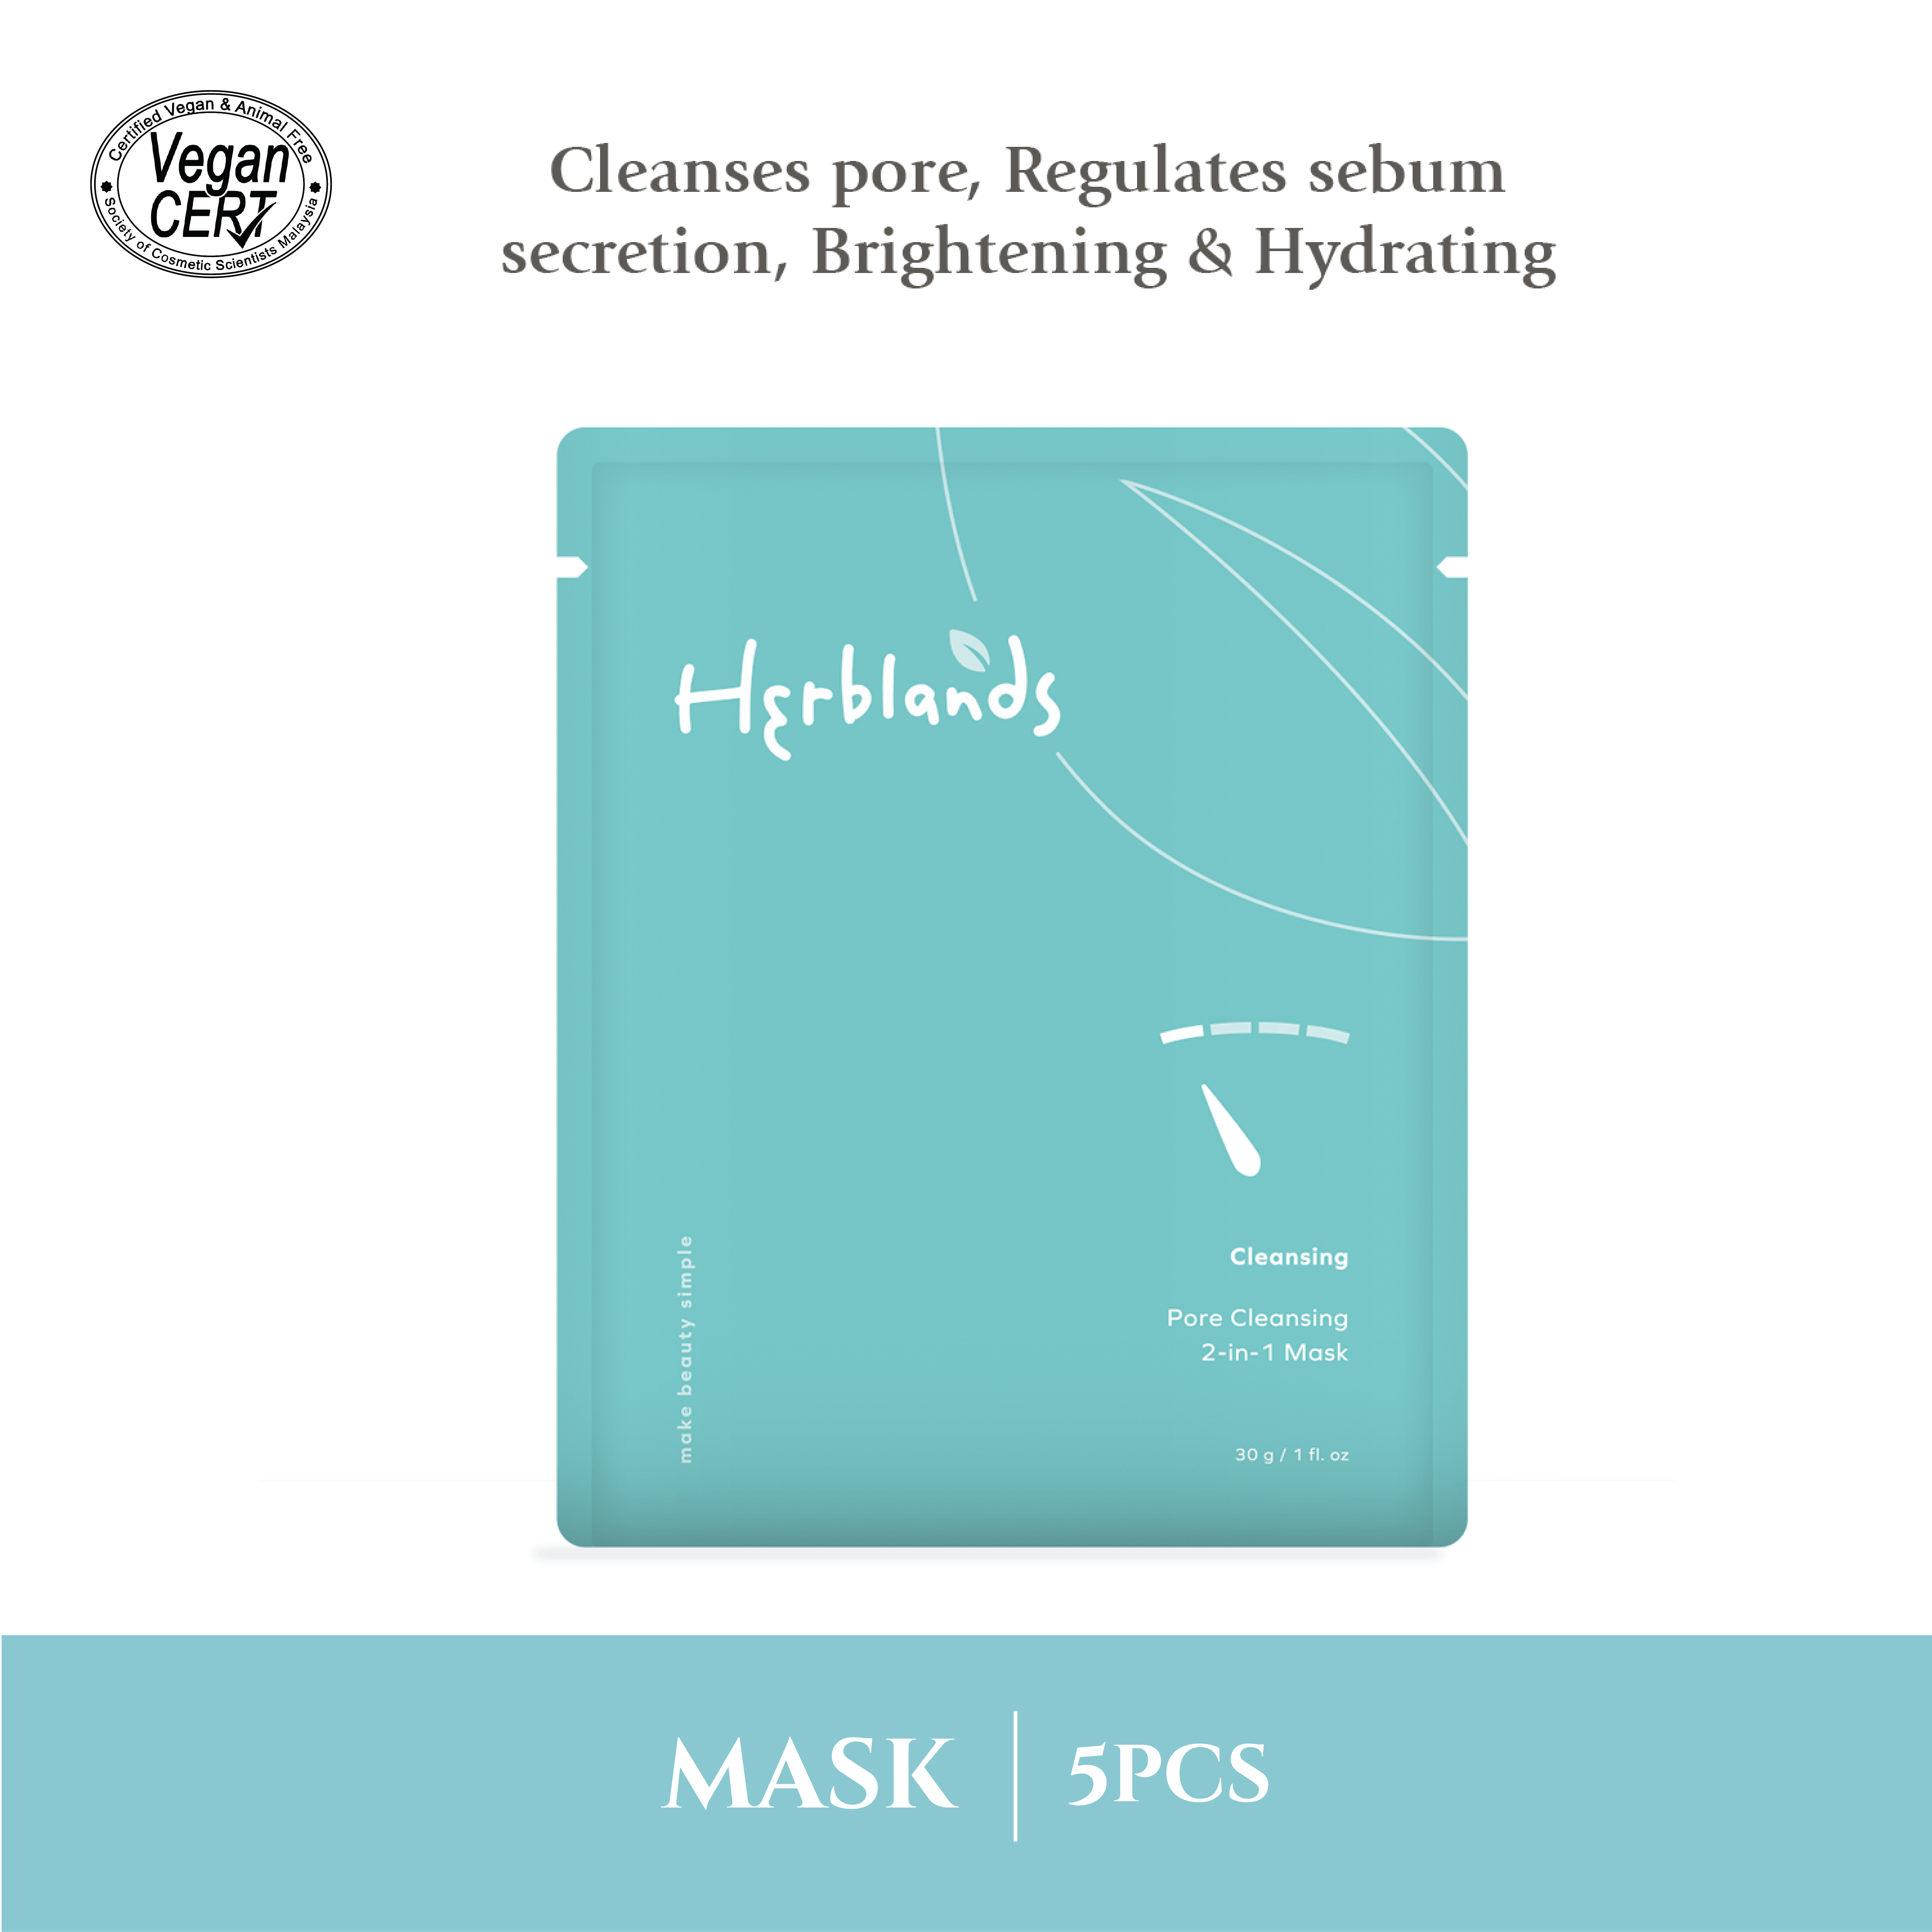 Herblands Pore Cleansing 2-in1 Mask